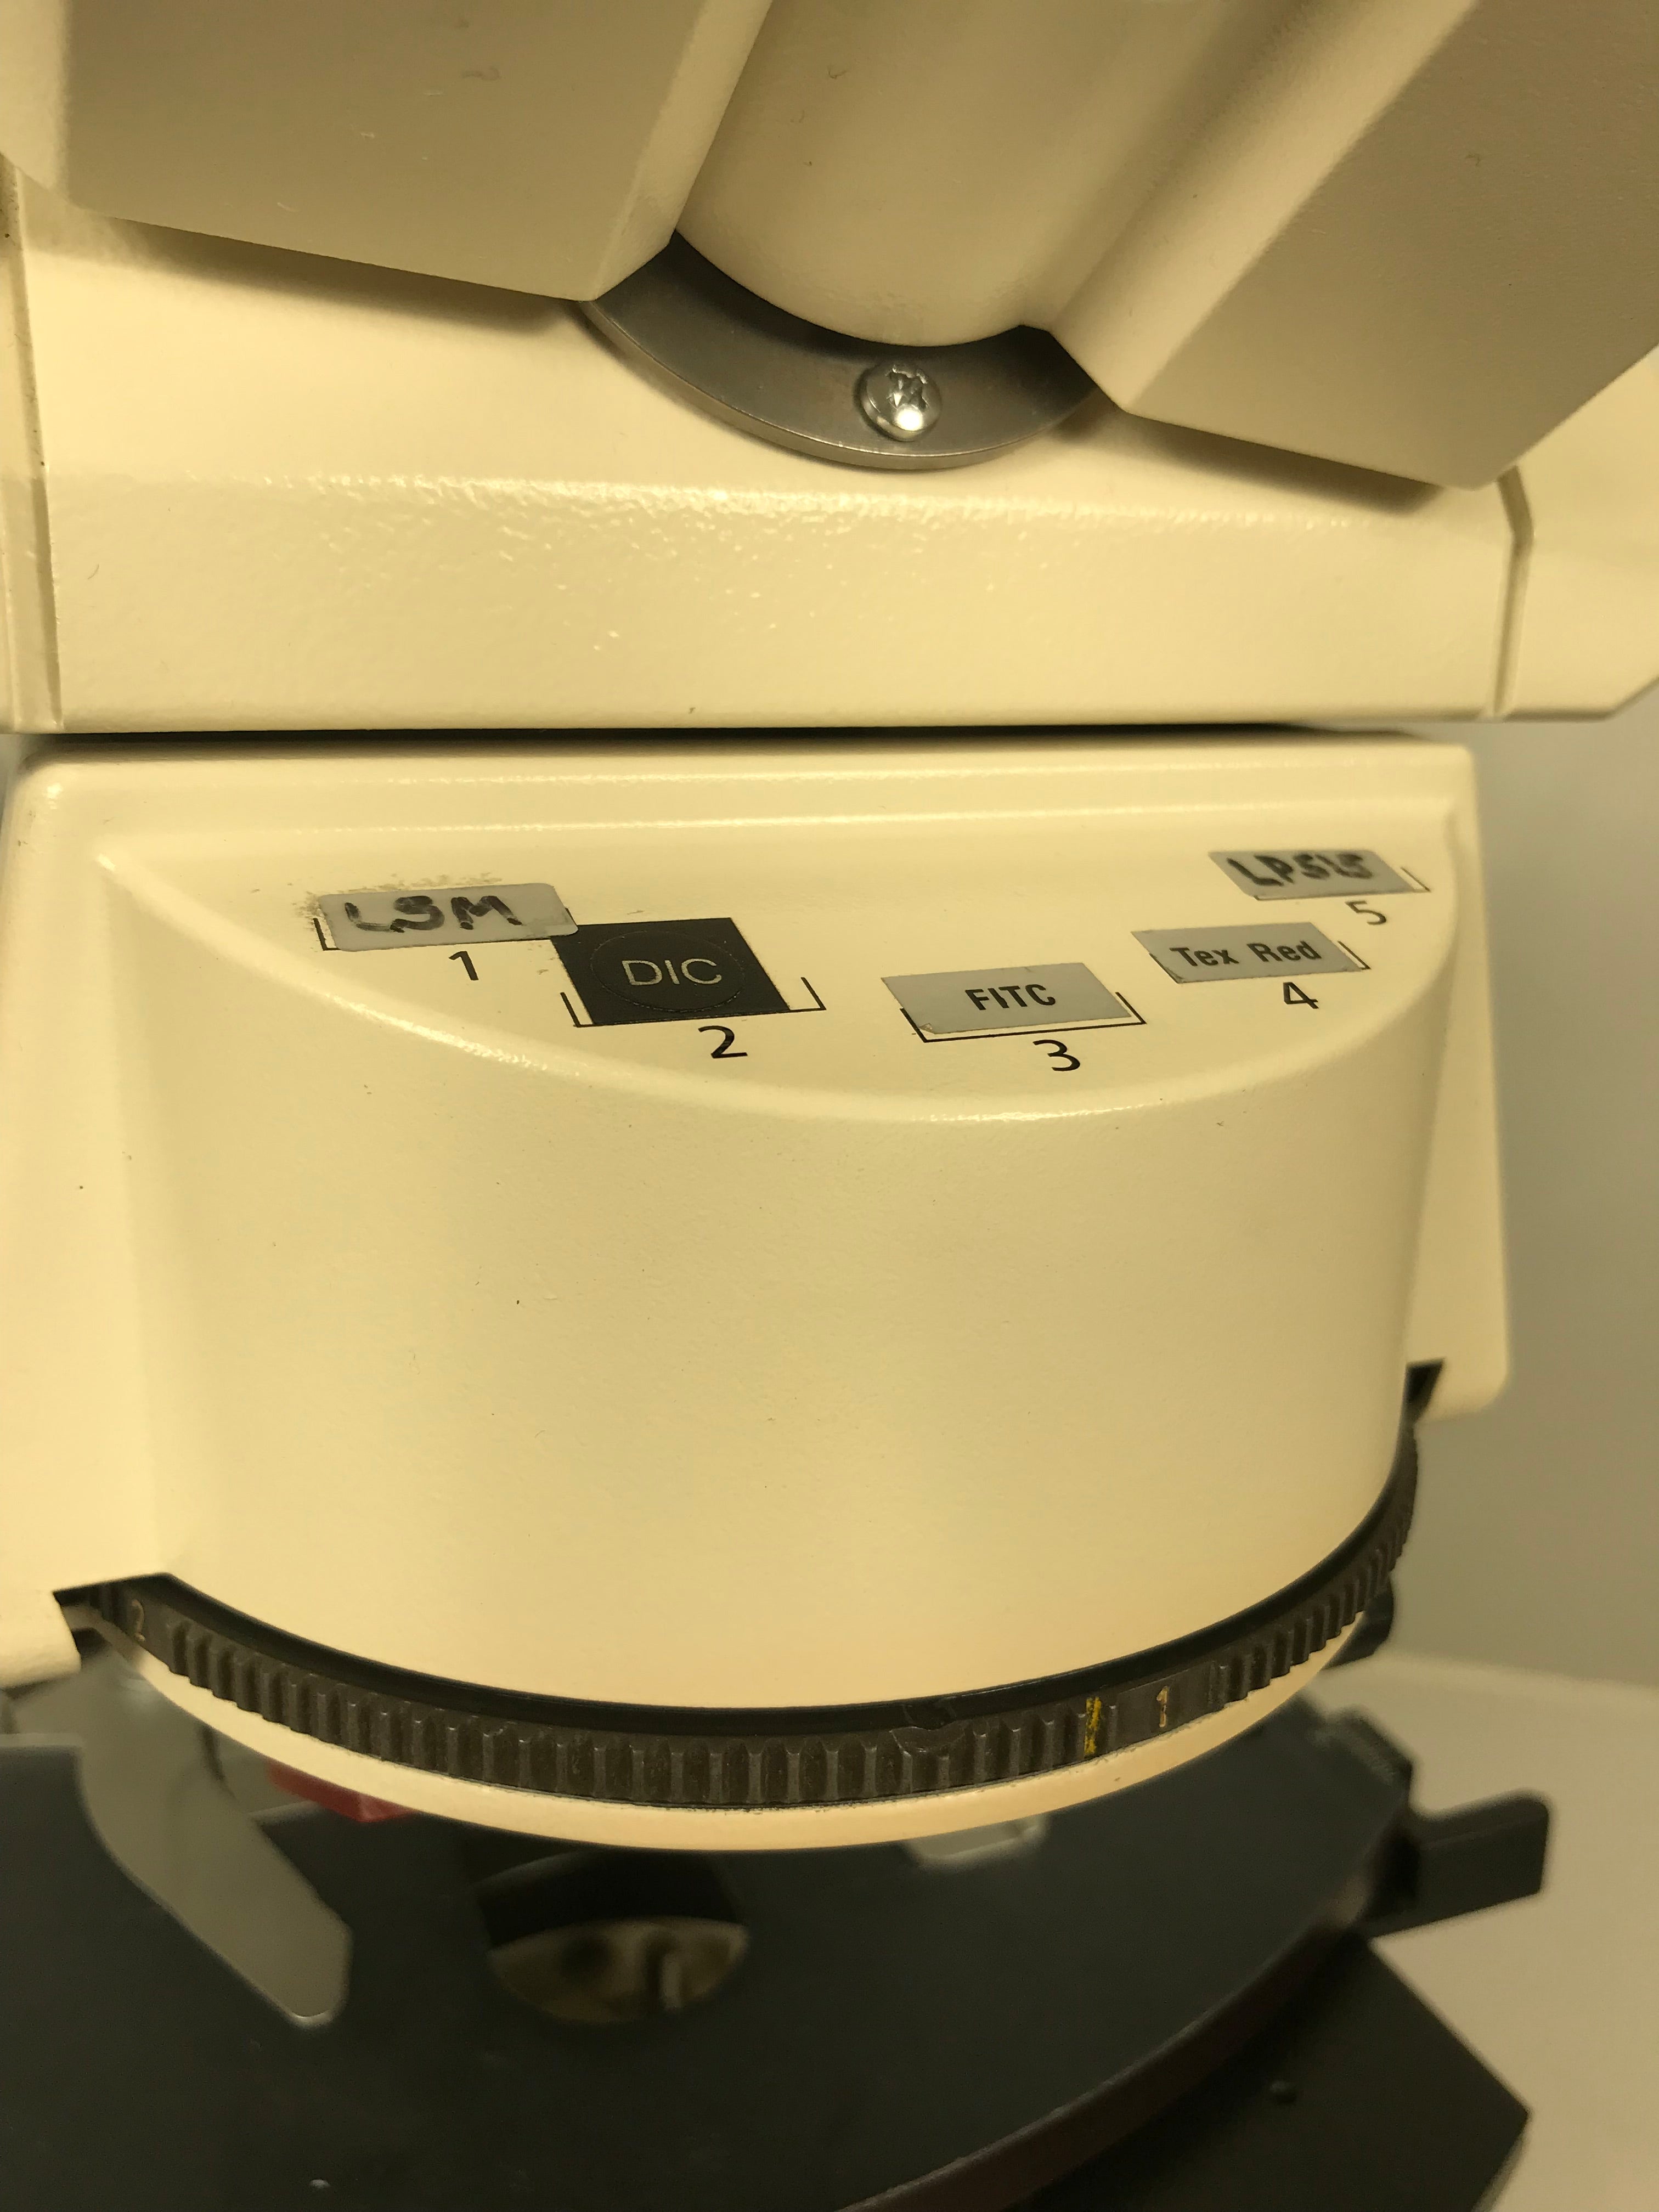 Zeiss AxioSkop 2 MOT Phase Contrast Laser Microscope W/ LSM 5 Pascal & LASOS Systems *For Parts or Repair*